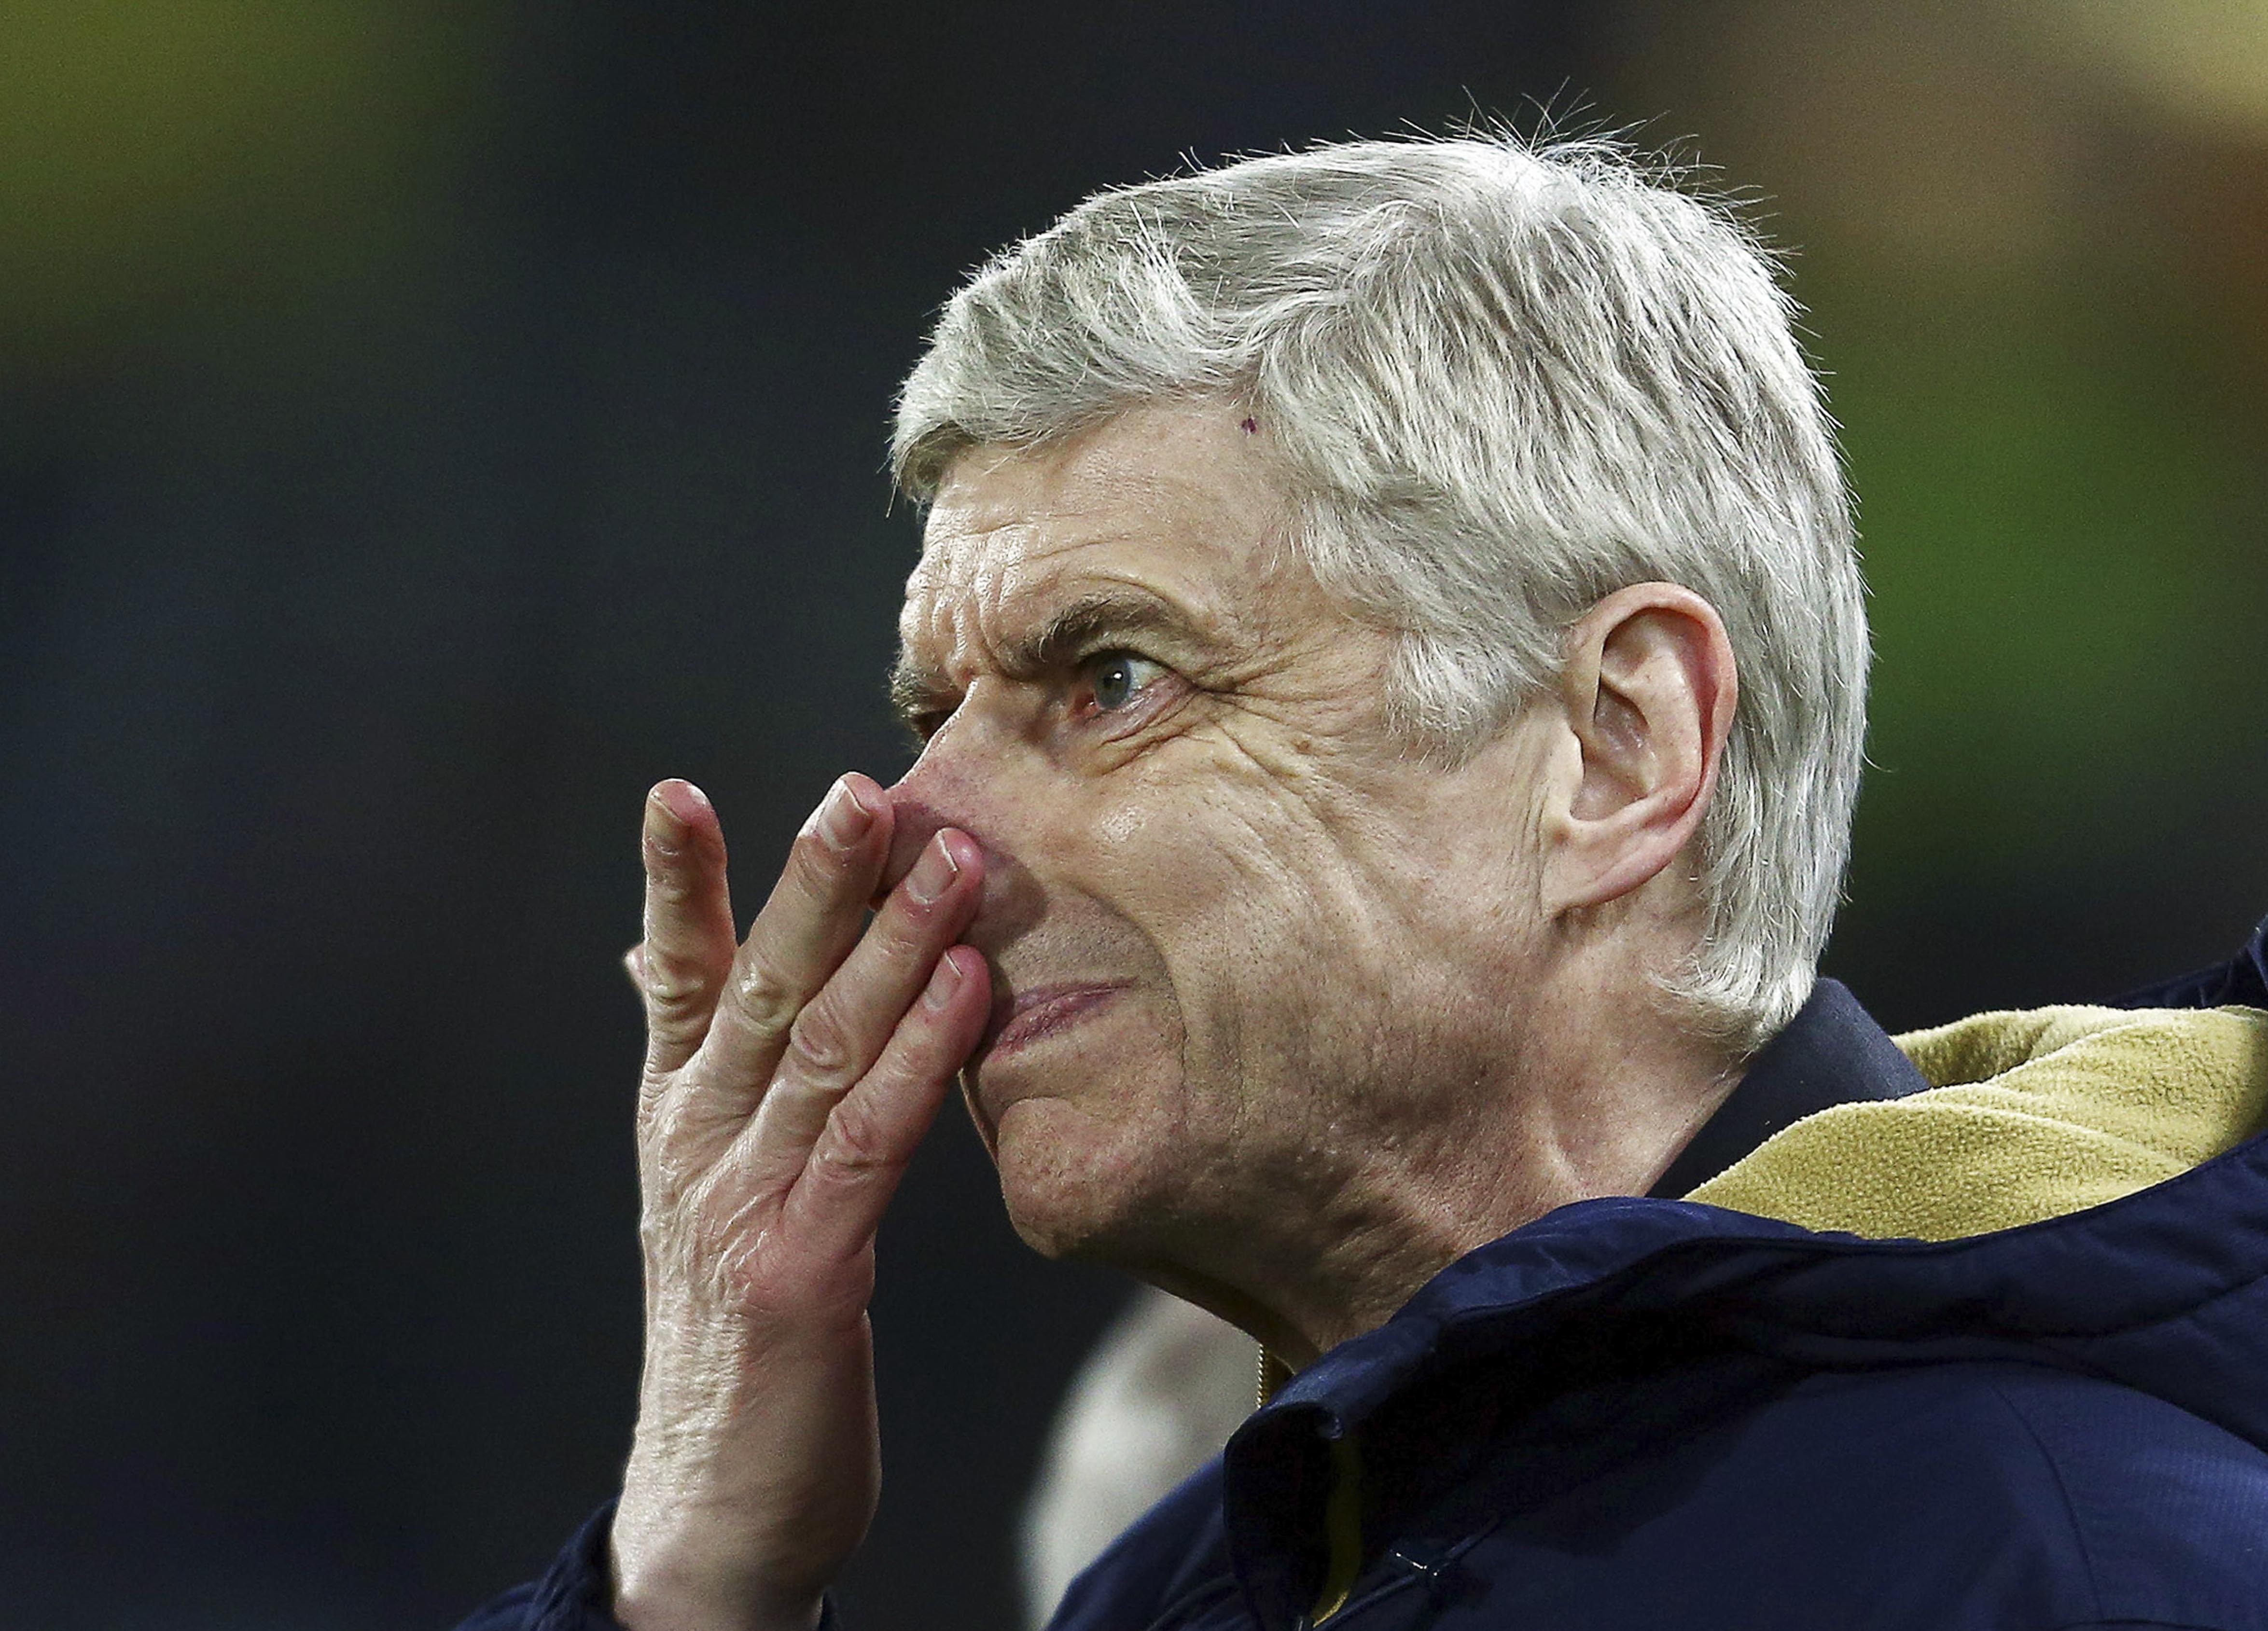 Arsenal manager Arsene Wenger wipes his nose during the Emirates FA Cup fifth round replay match between Hull City and Arsenal played at the Kingston Communications Stadium, Hull on March 8th 2016 West / Bpi / Icon Sport *** Local Caption ***